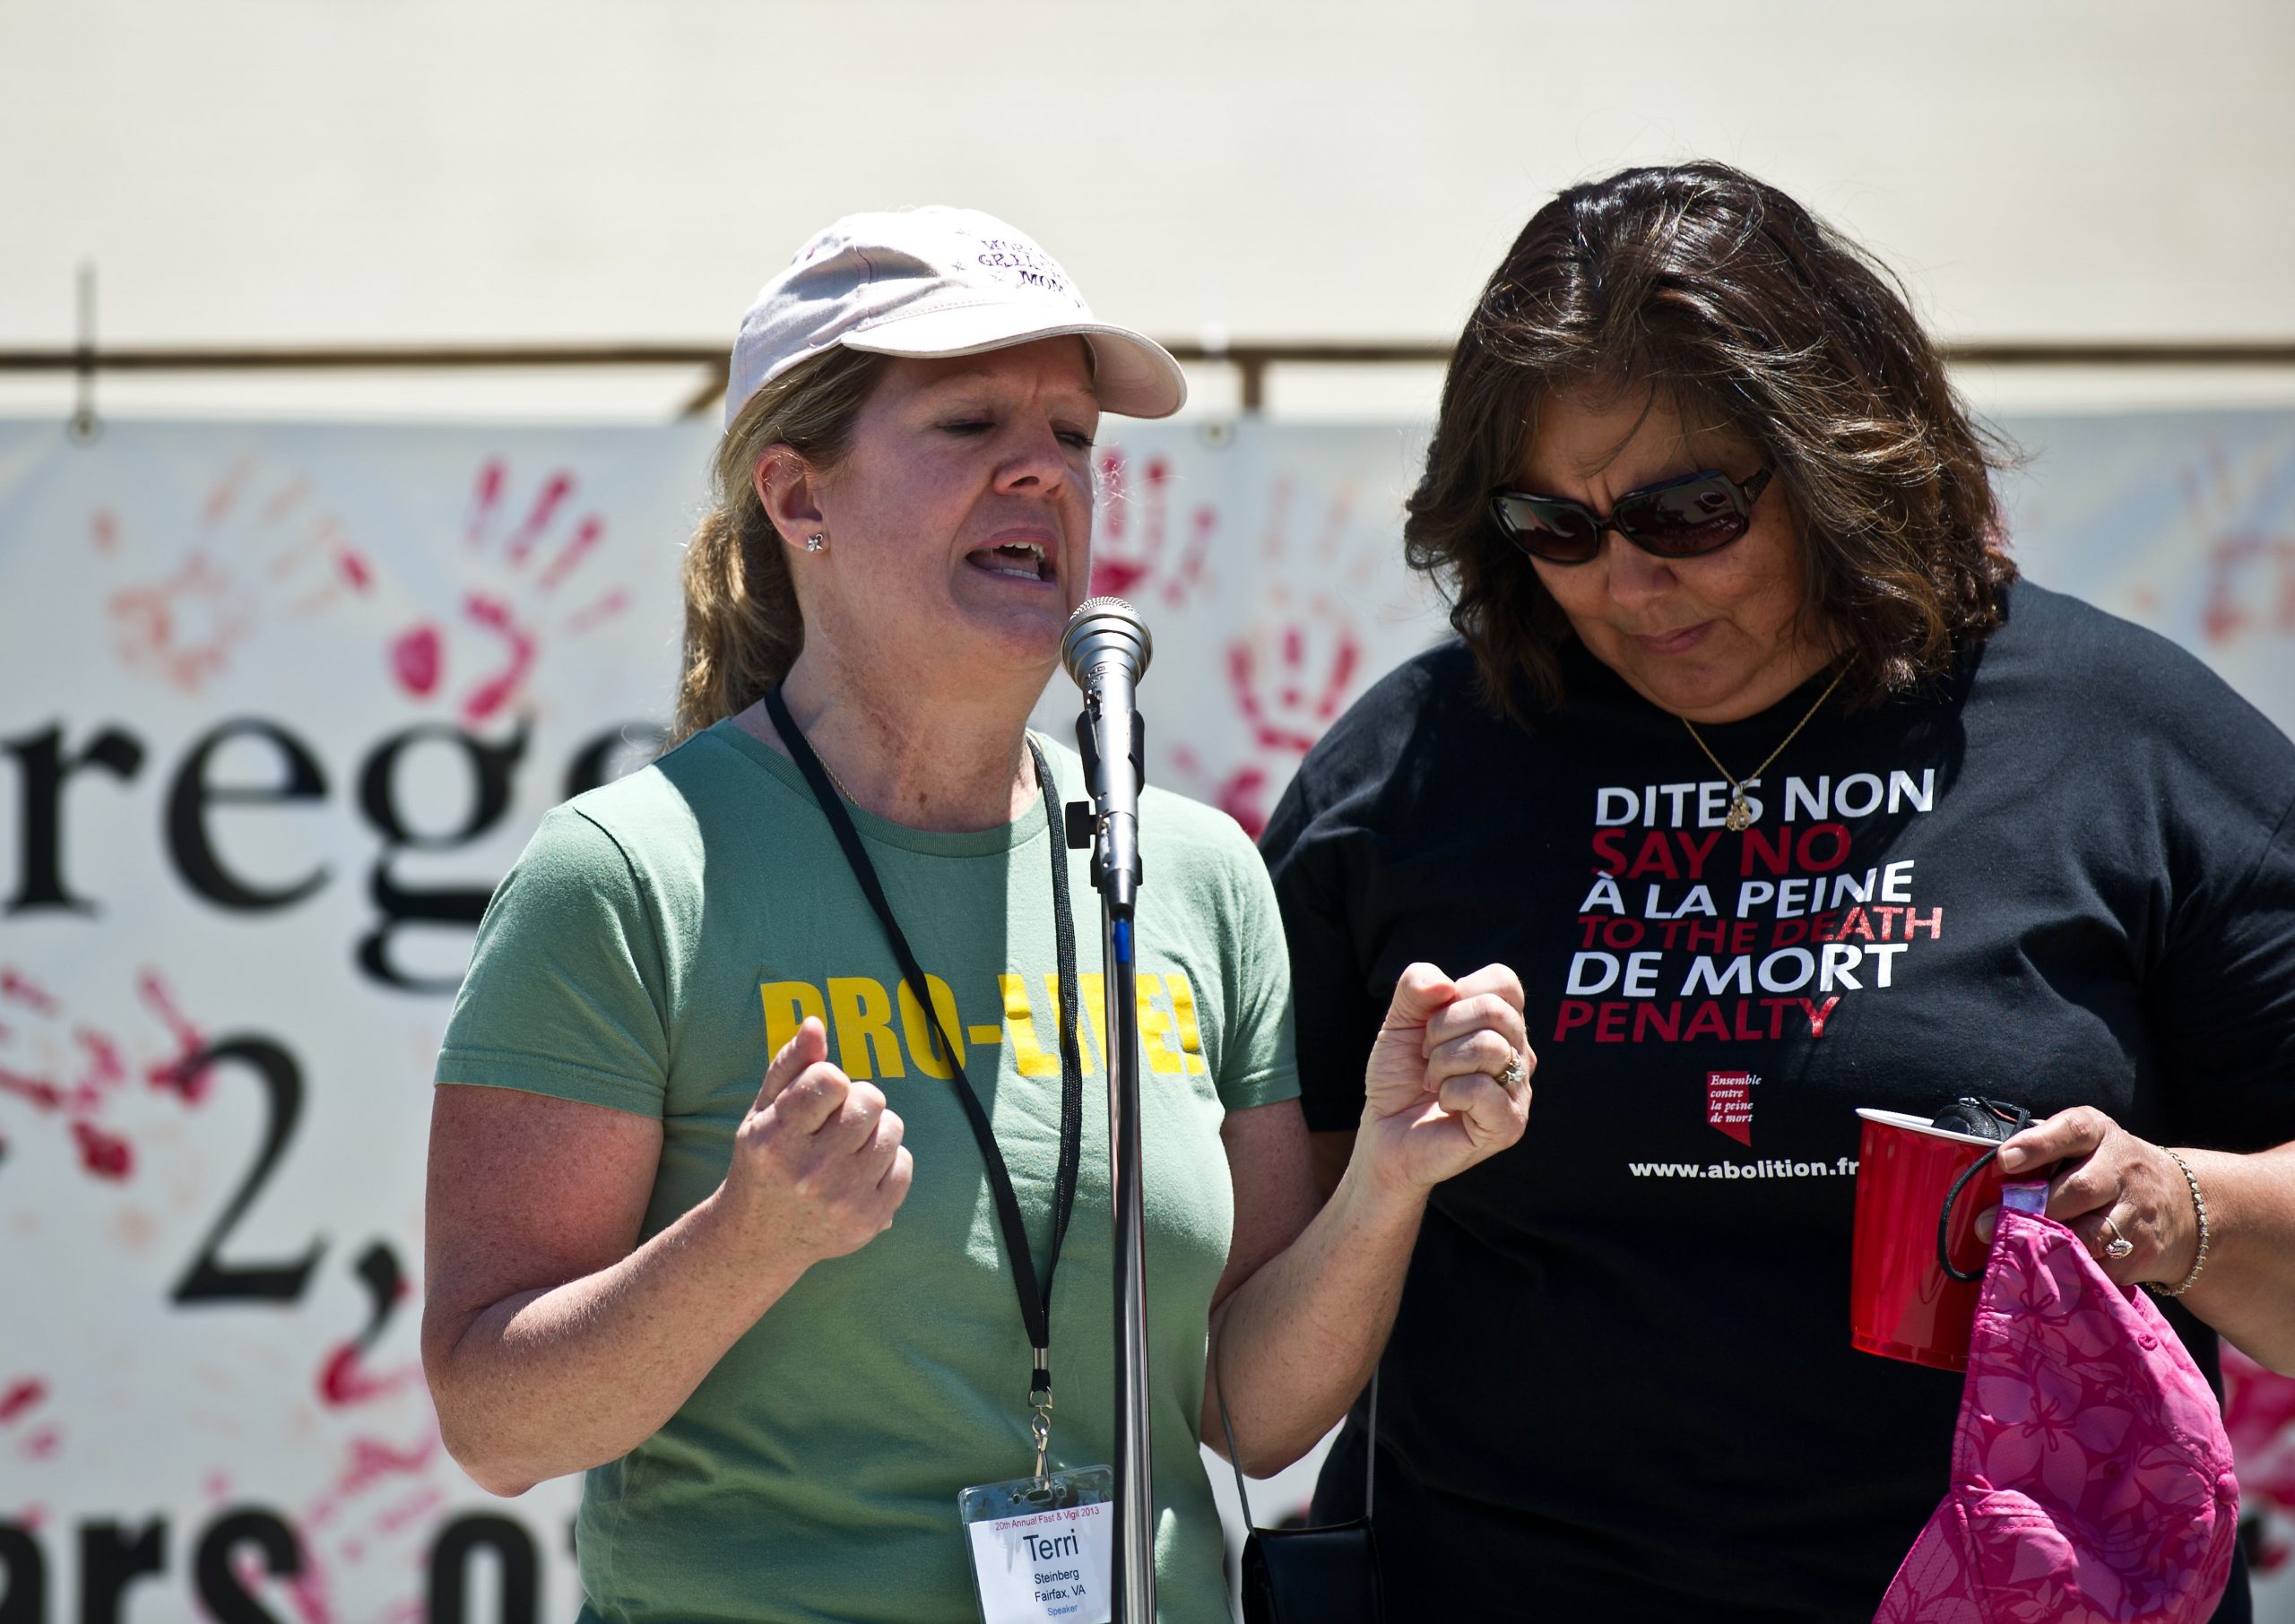 Terri Steinberg (L), whose son is on death row, speaks with Delia Perez Meyer, whose brother is on death row, during the 20th annual Starvin' for Justice fast and vigil against the death penalty in front of the US Supreme Court in Washington on June 29, 2013.